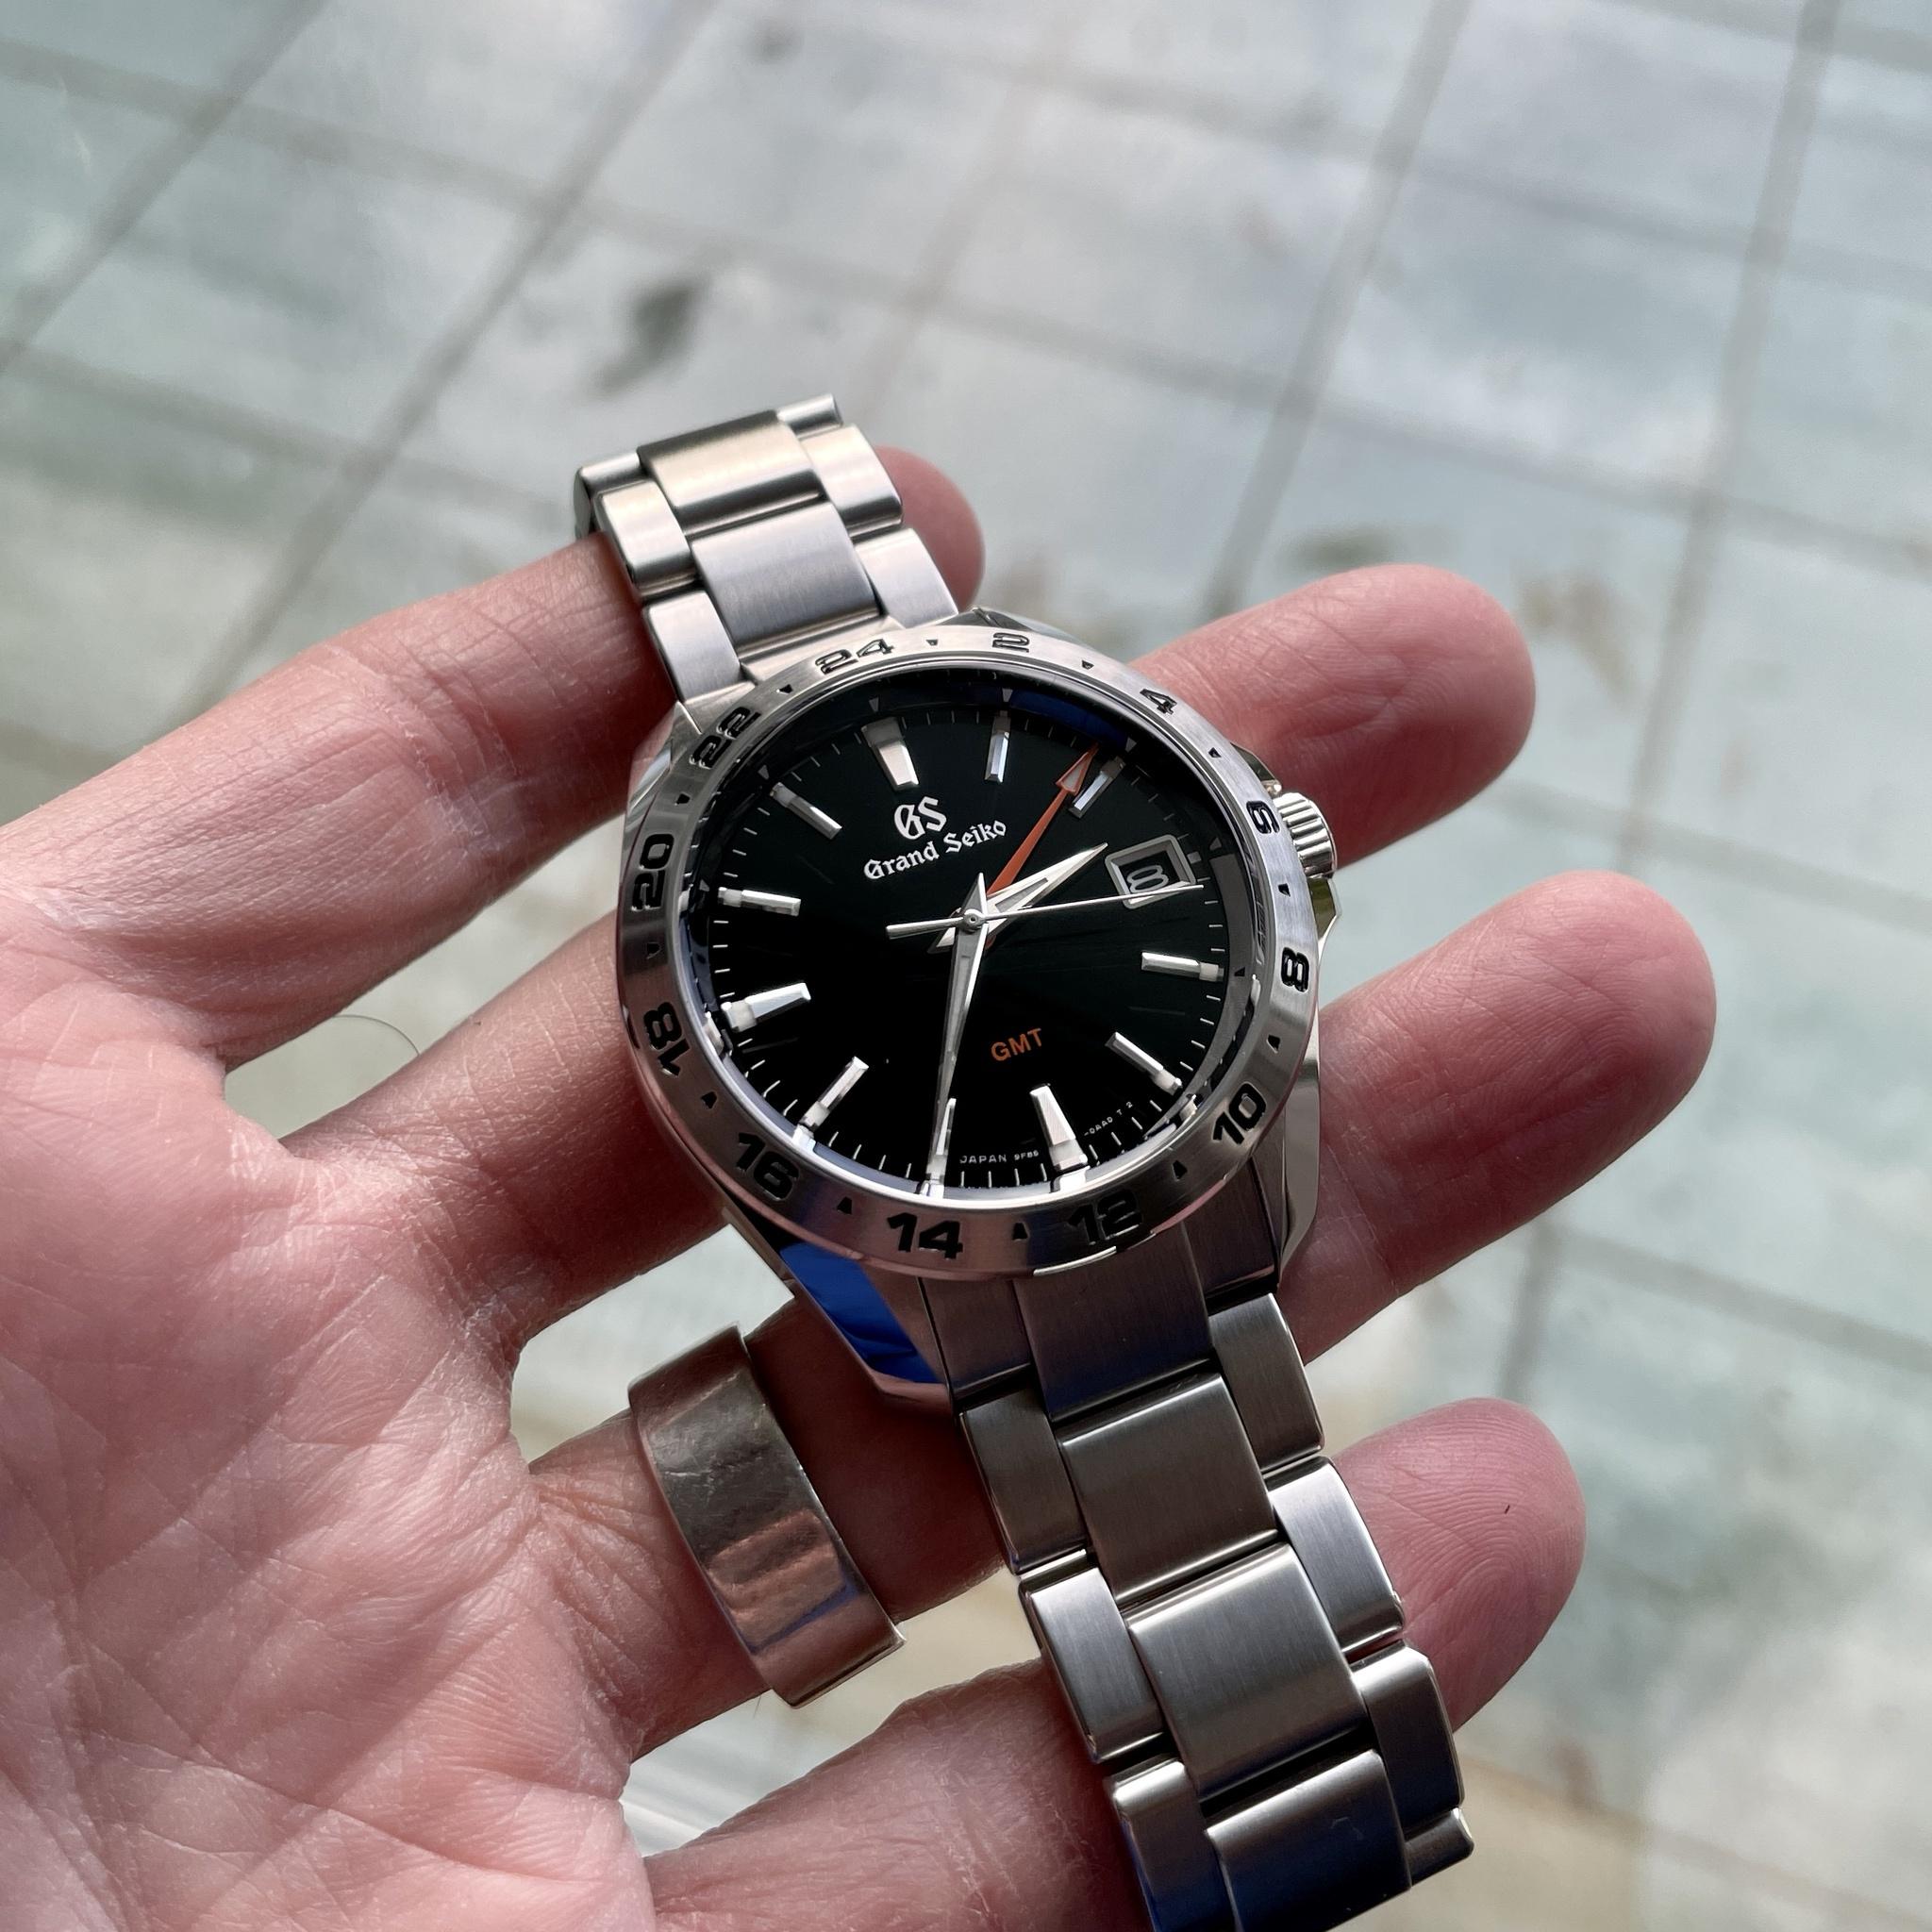 2,500 USD] For Sale: Grand Seiko SBGN003 39mm 9F Quartz GMT, Full Set, AD  Purchased - Mint! | WatchCharts